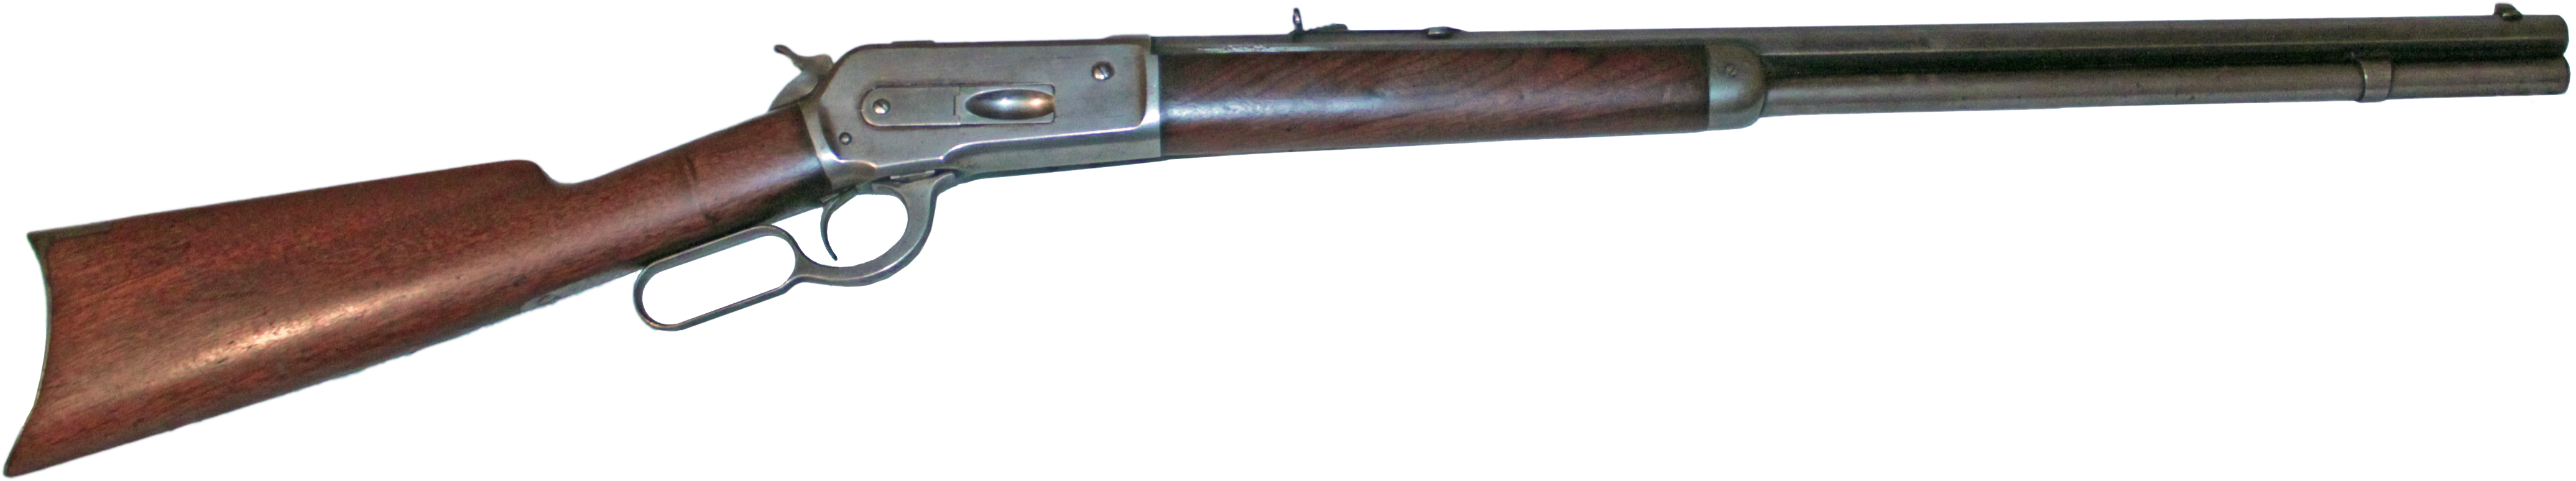 Gun clipart lever action rifle. The homebrewery naturalcrit simple